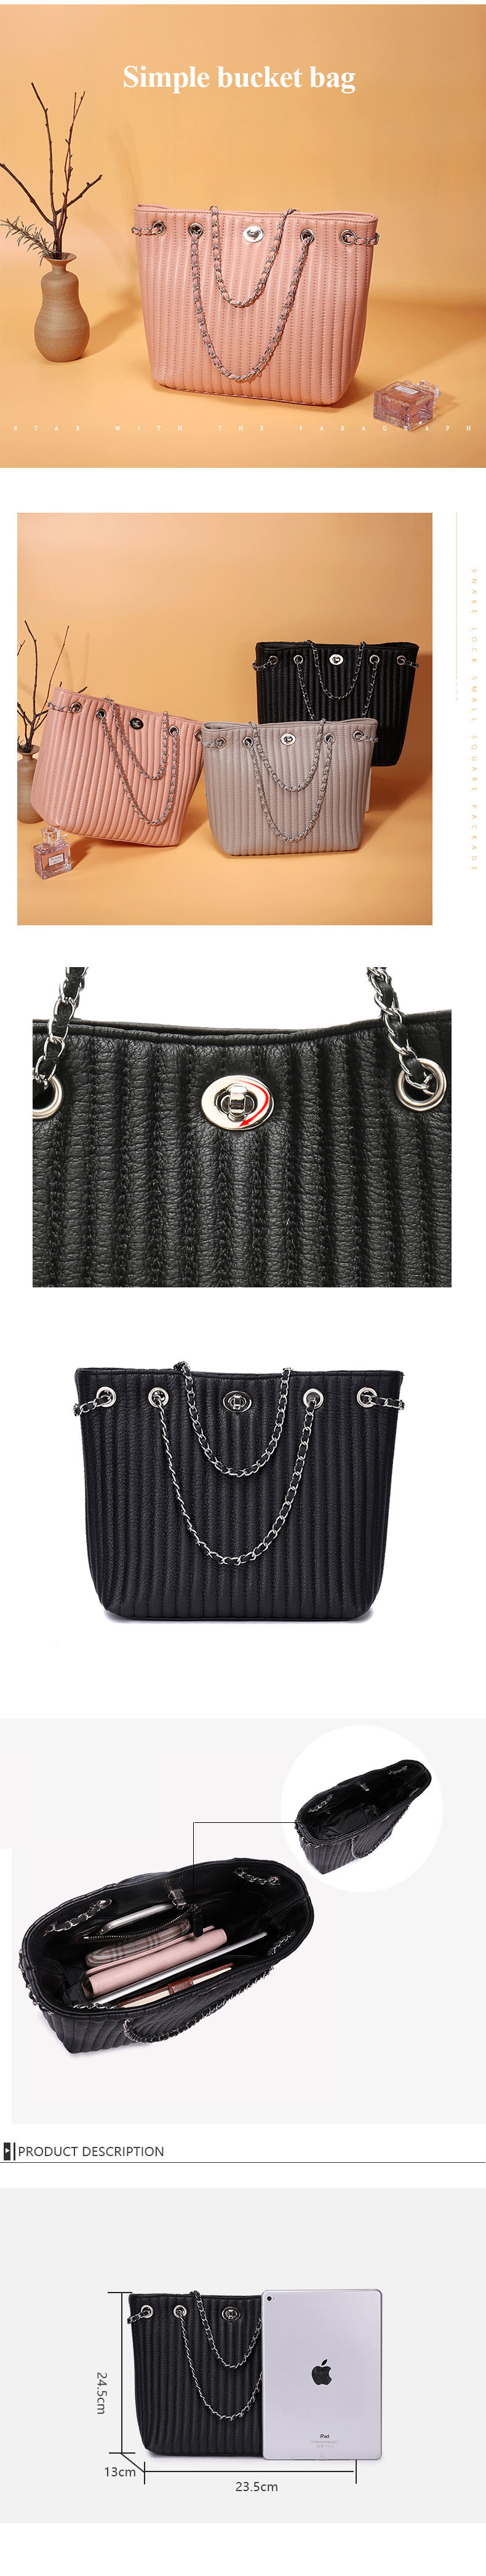 New Fragrance Stylr Cowhide Leather Cross Chain Bag